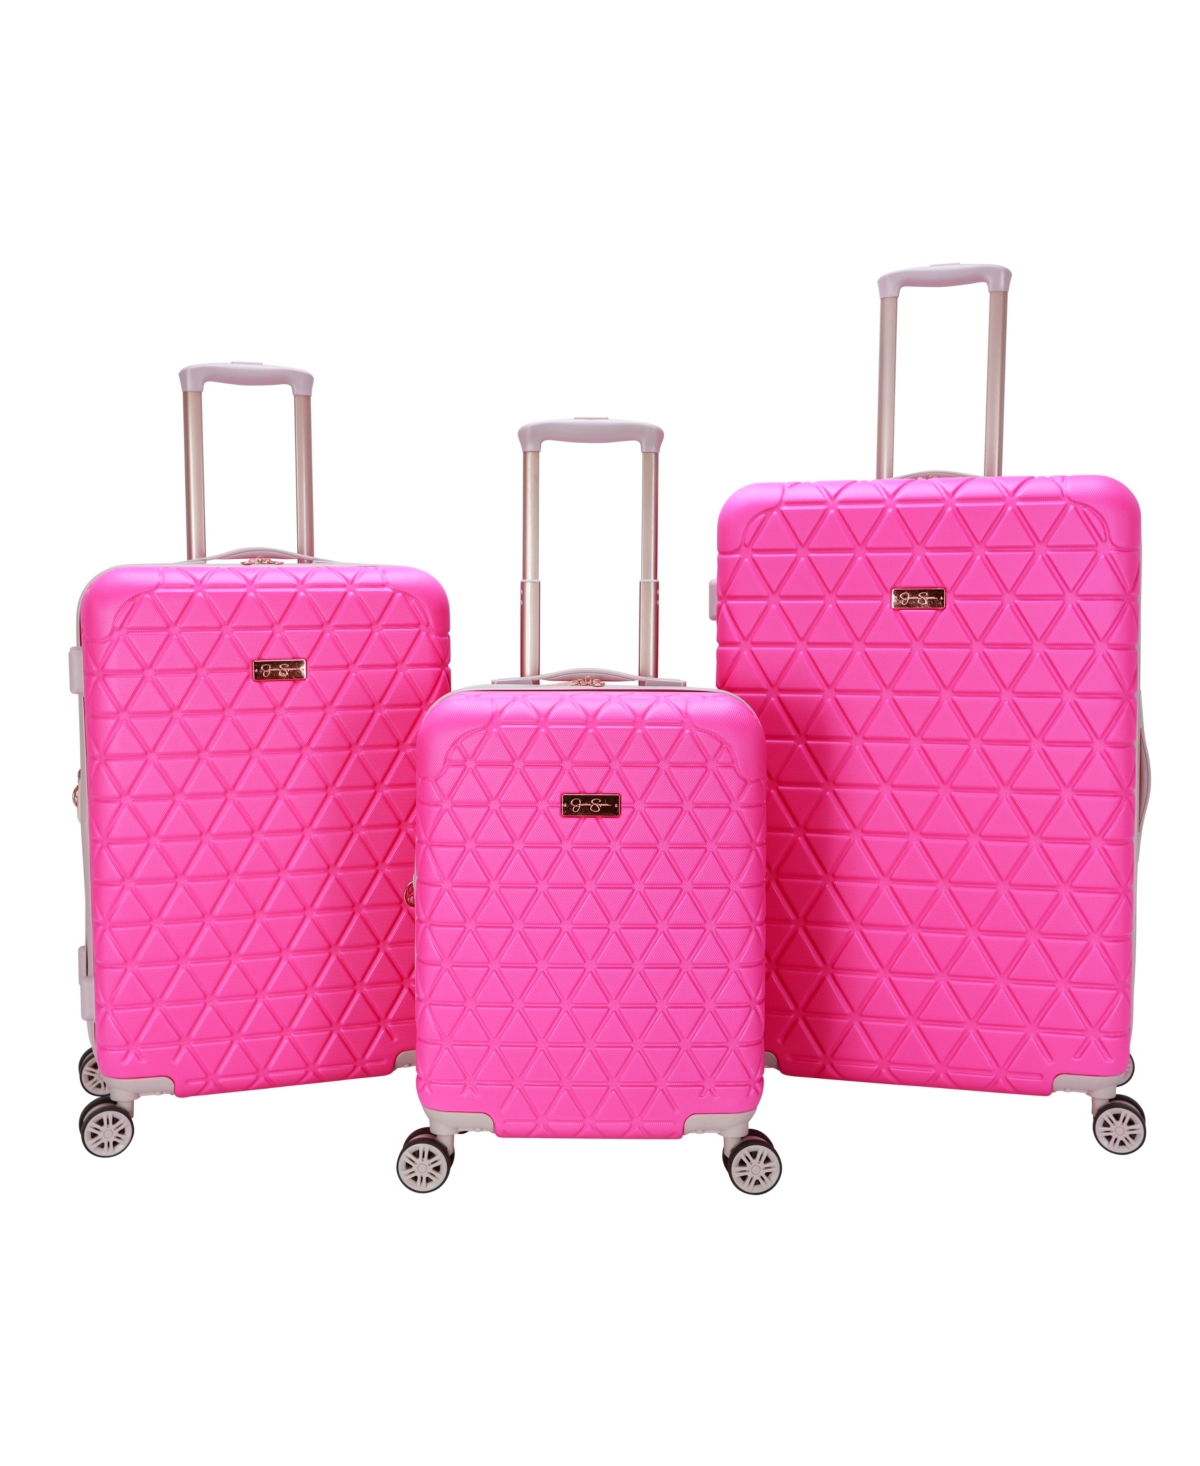 Jessica Simpson Dreamer 3 Piece Hardside Luggage Set In Hot Pink